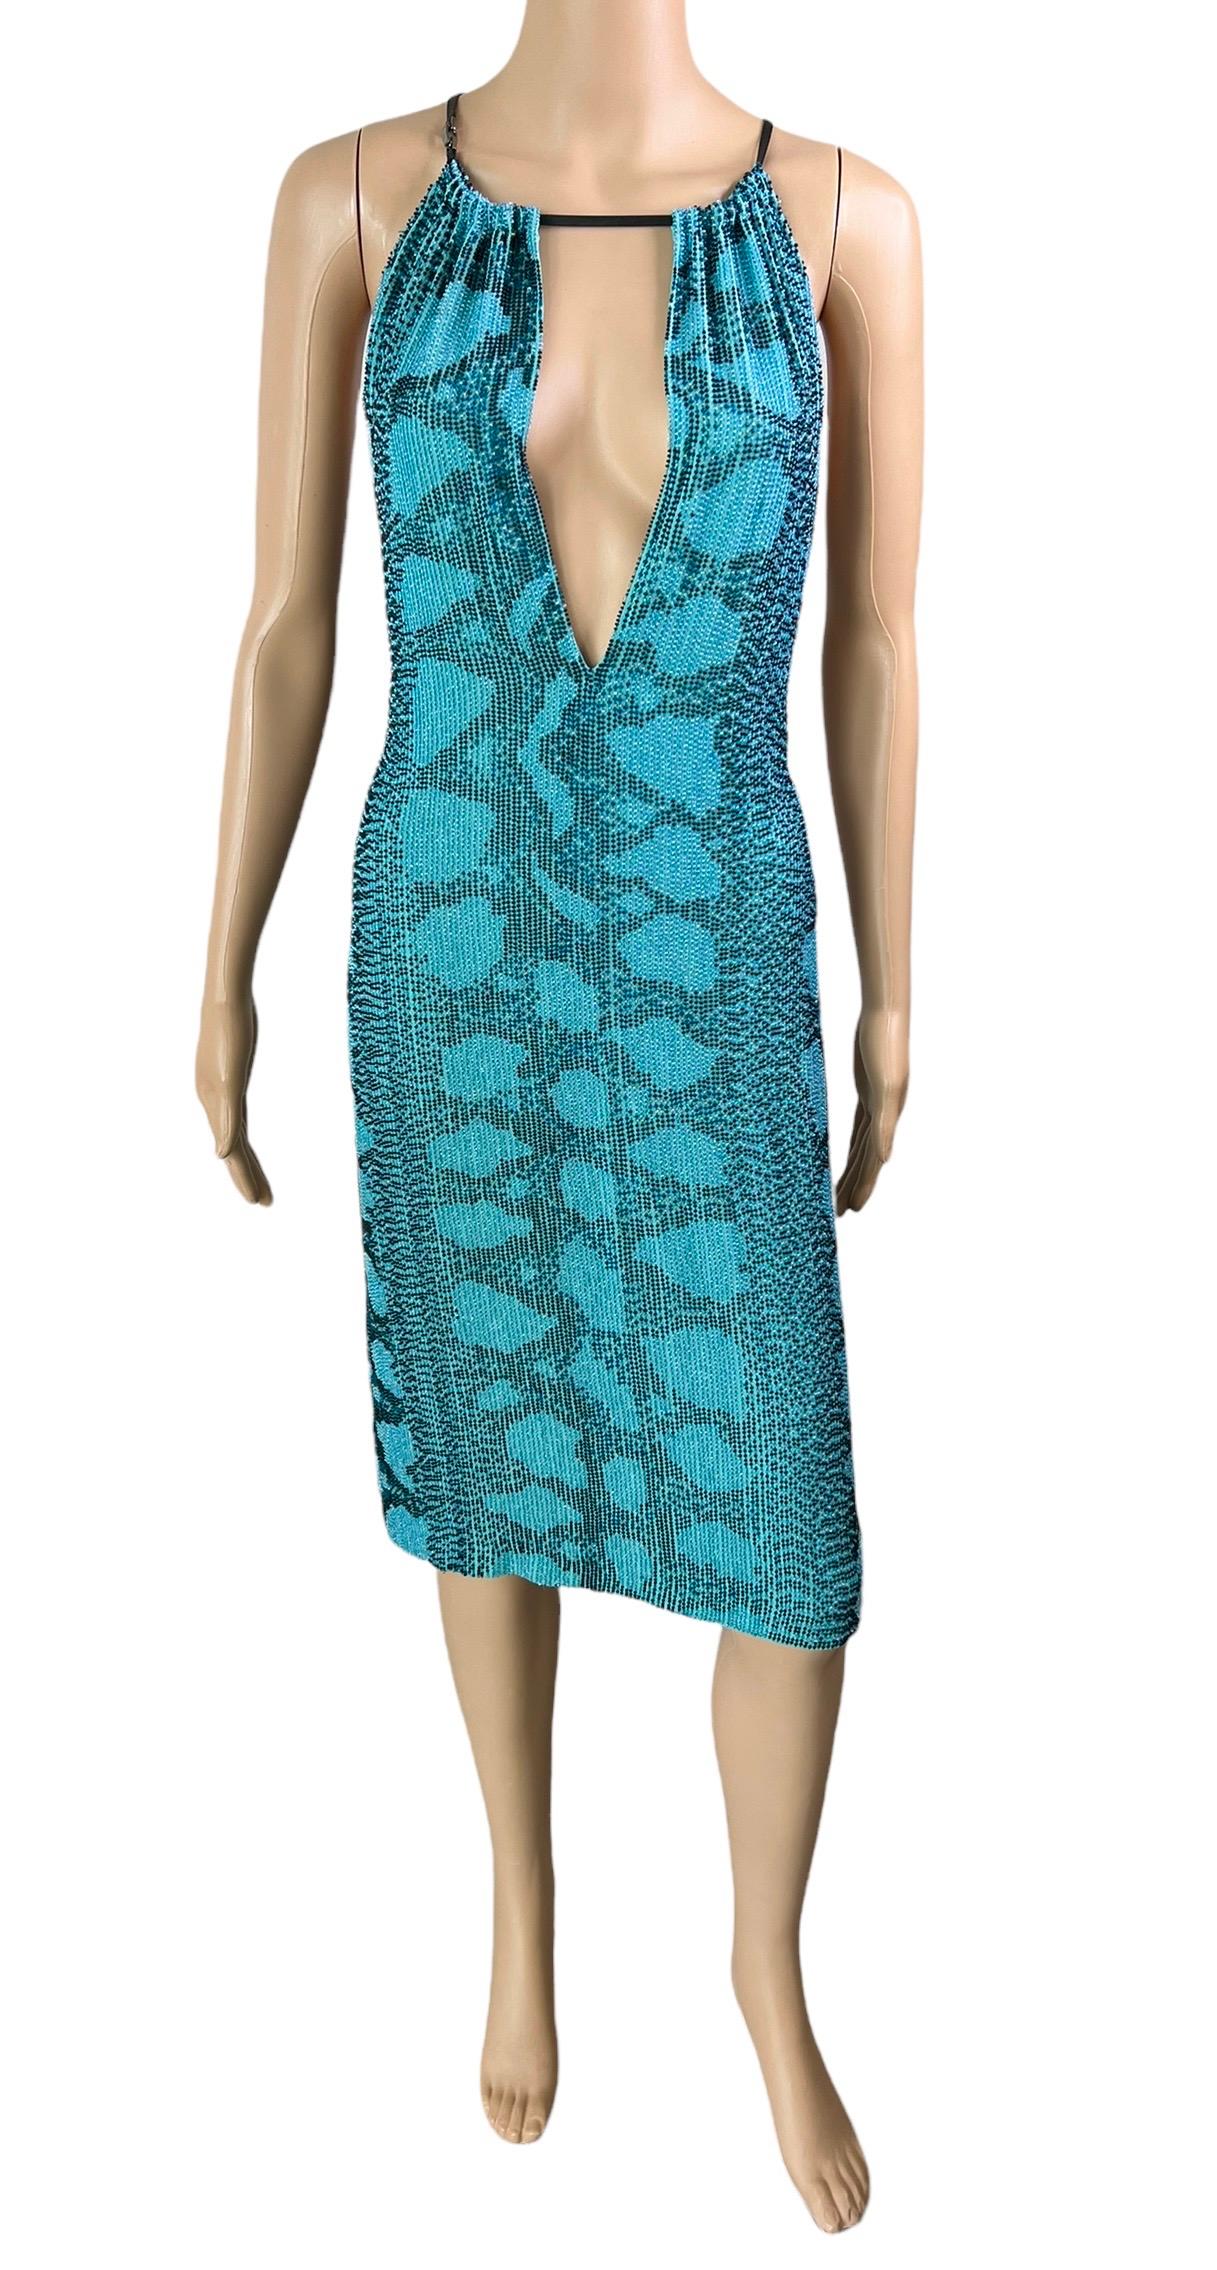 Women's or Men's Tom Ford for Gucci S/S 2000 Runway Embellished Plunging Python Print Midi Dress